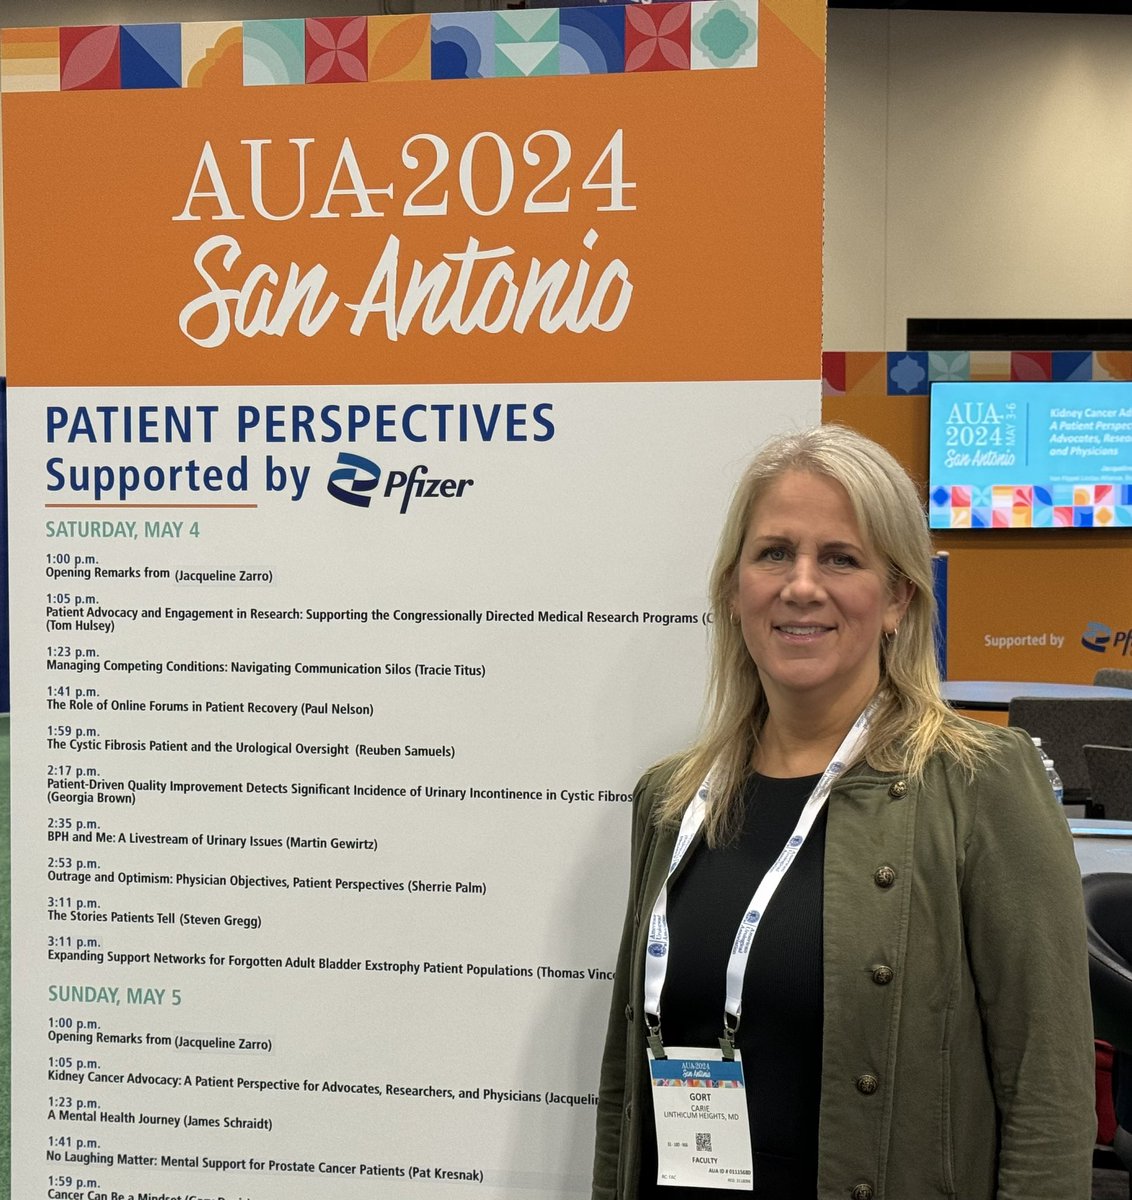 Today! Come by #AUA2024 Patient perspectives at 3:15 to be inspired by #kidneycancer patient Carie Gort and learn how she’s managing treatment related diarrhea through dietary changes.